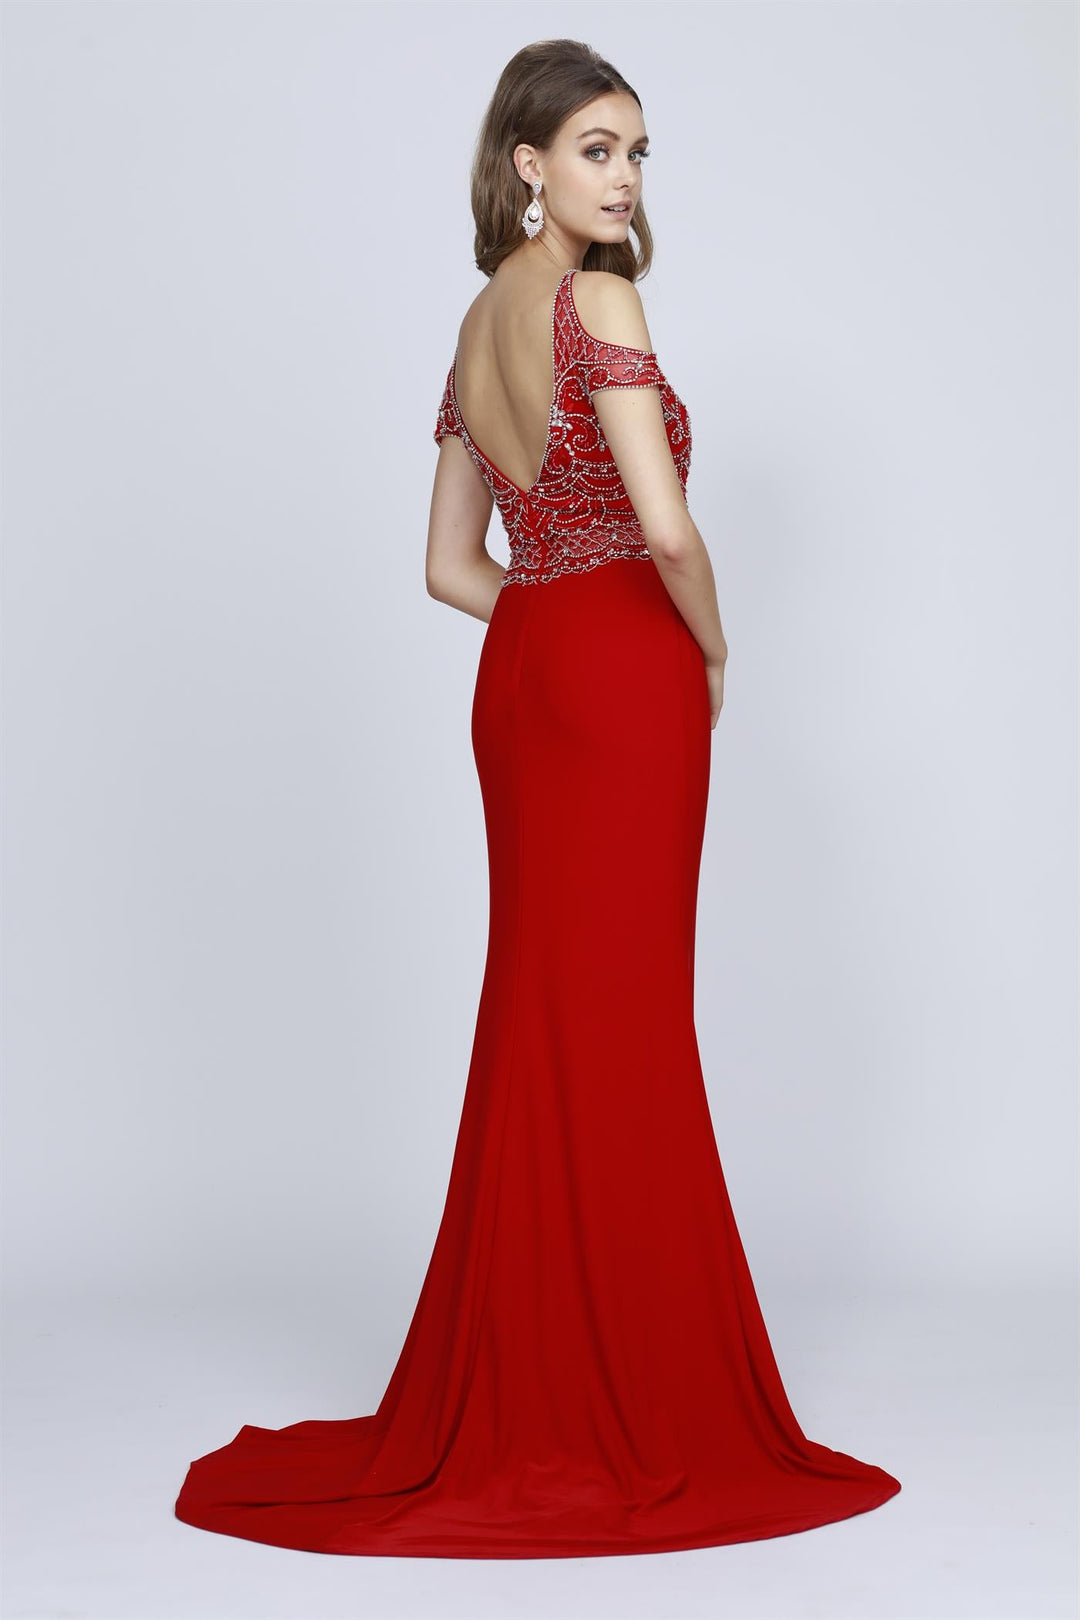 Beaded Long Cold Shoulder Fitted Dress by Juliet 660